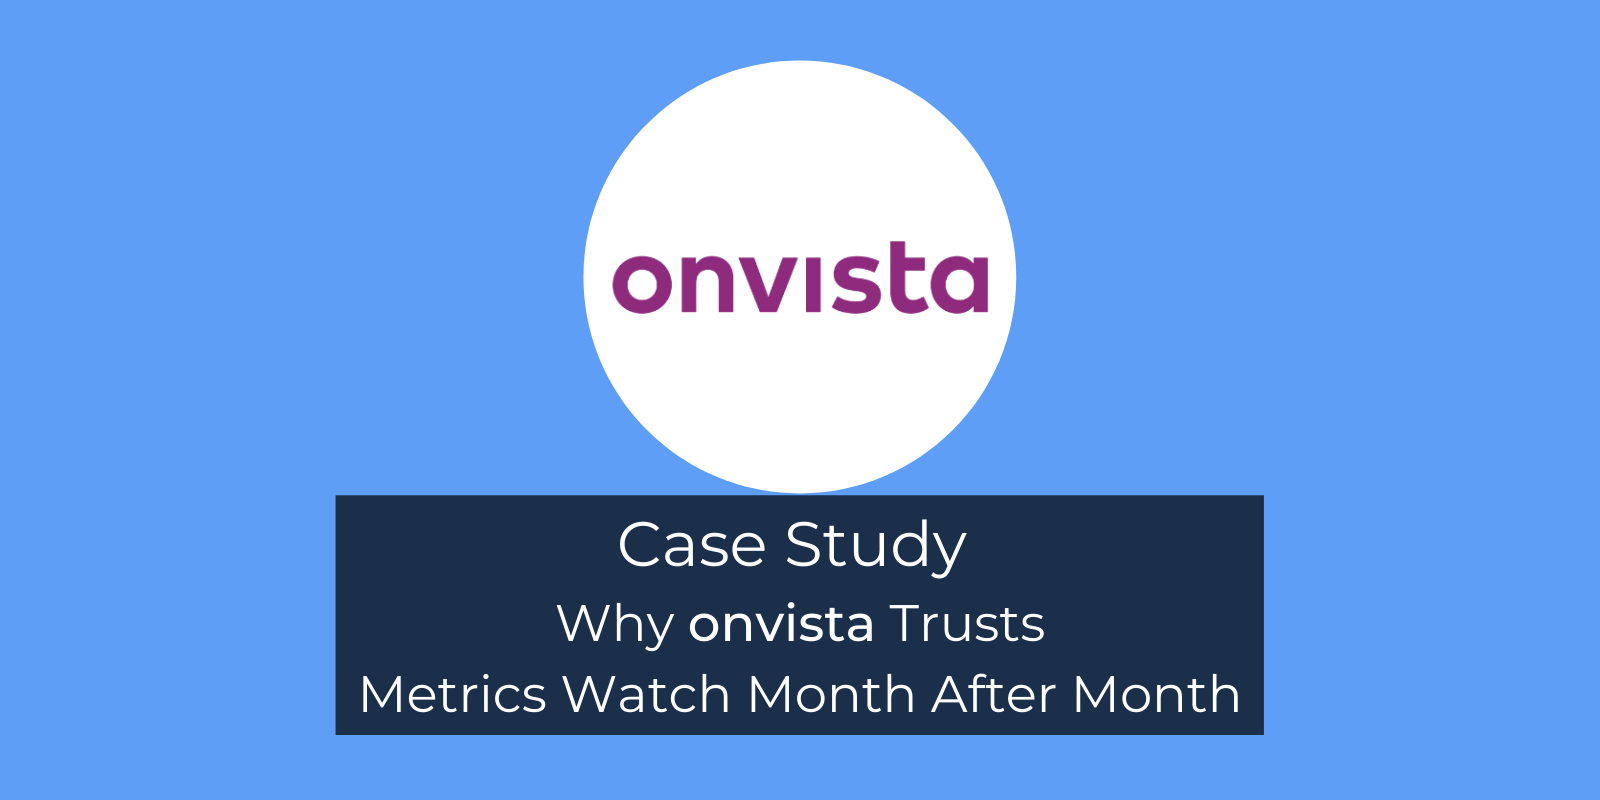 Case Study: Why onvista Trusts Metrics Watch Month After Month